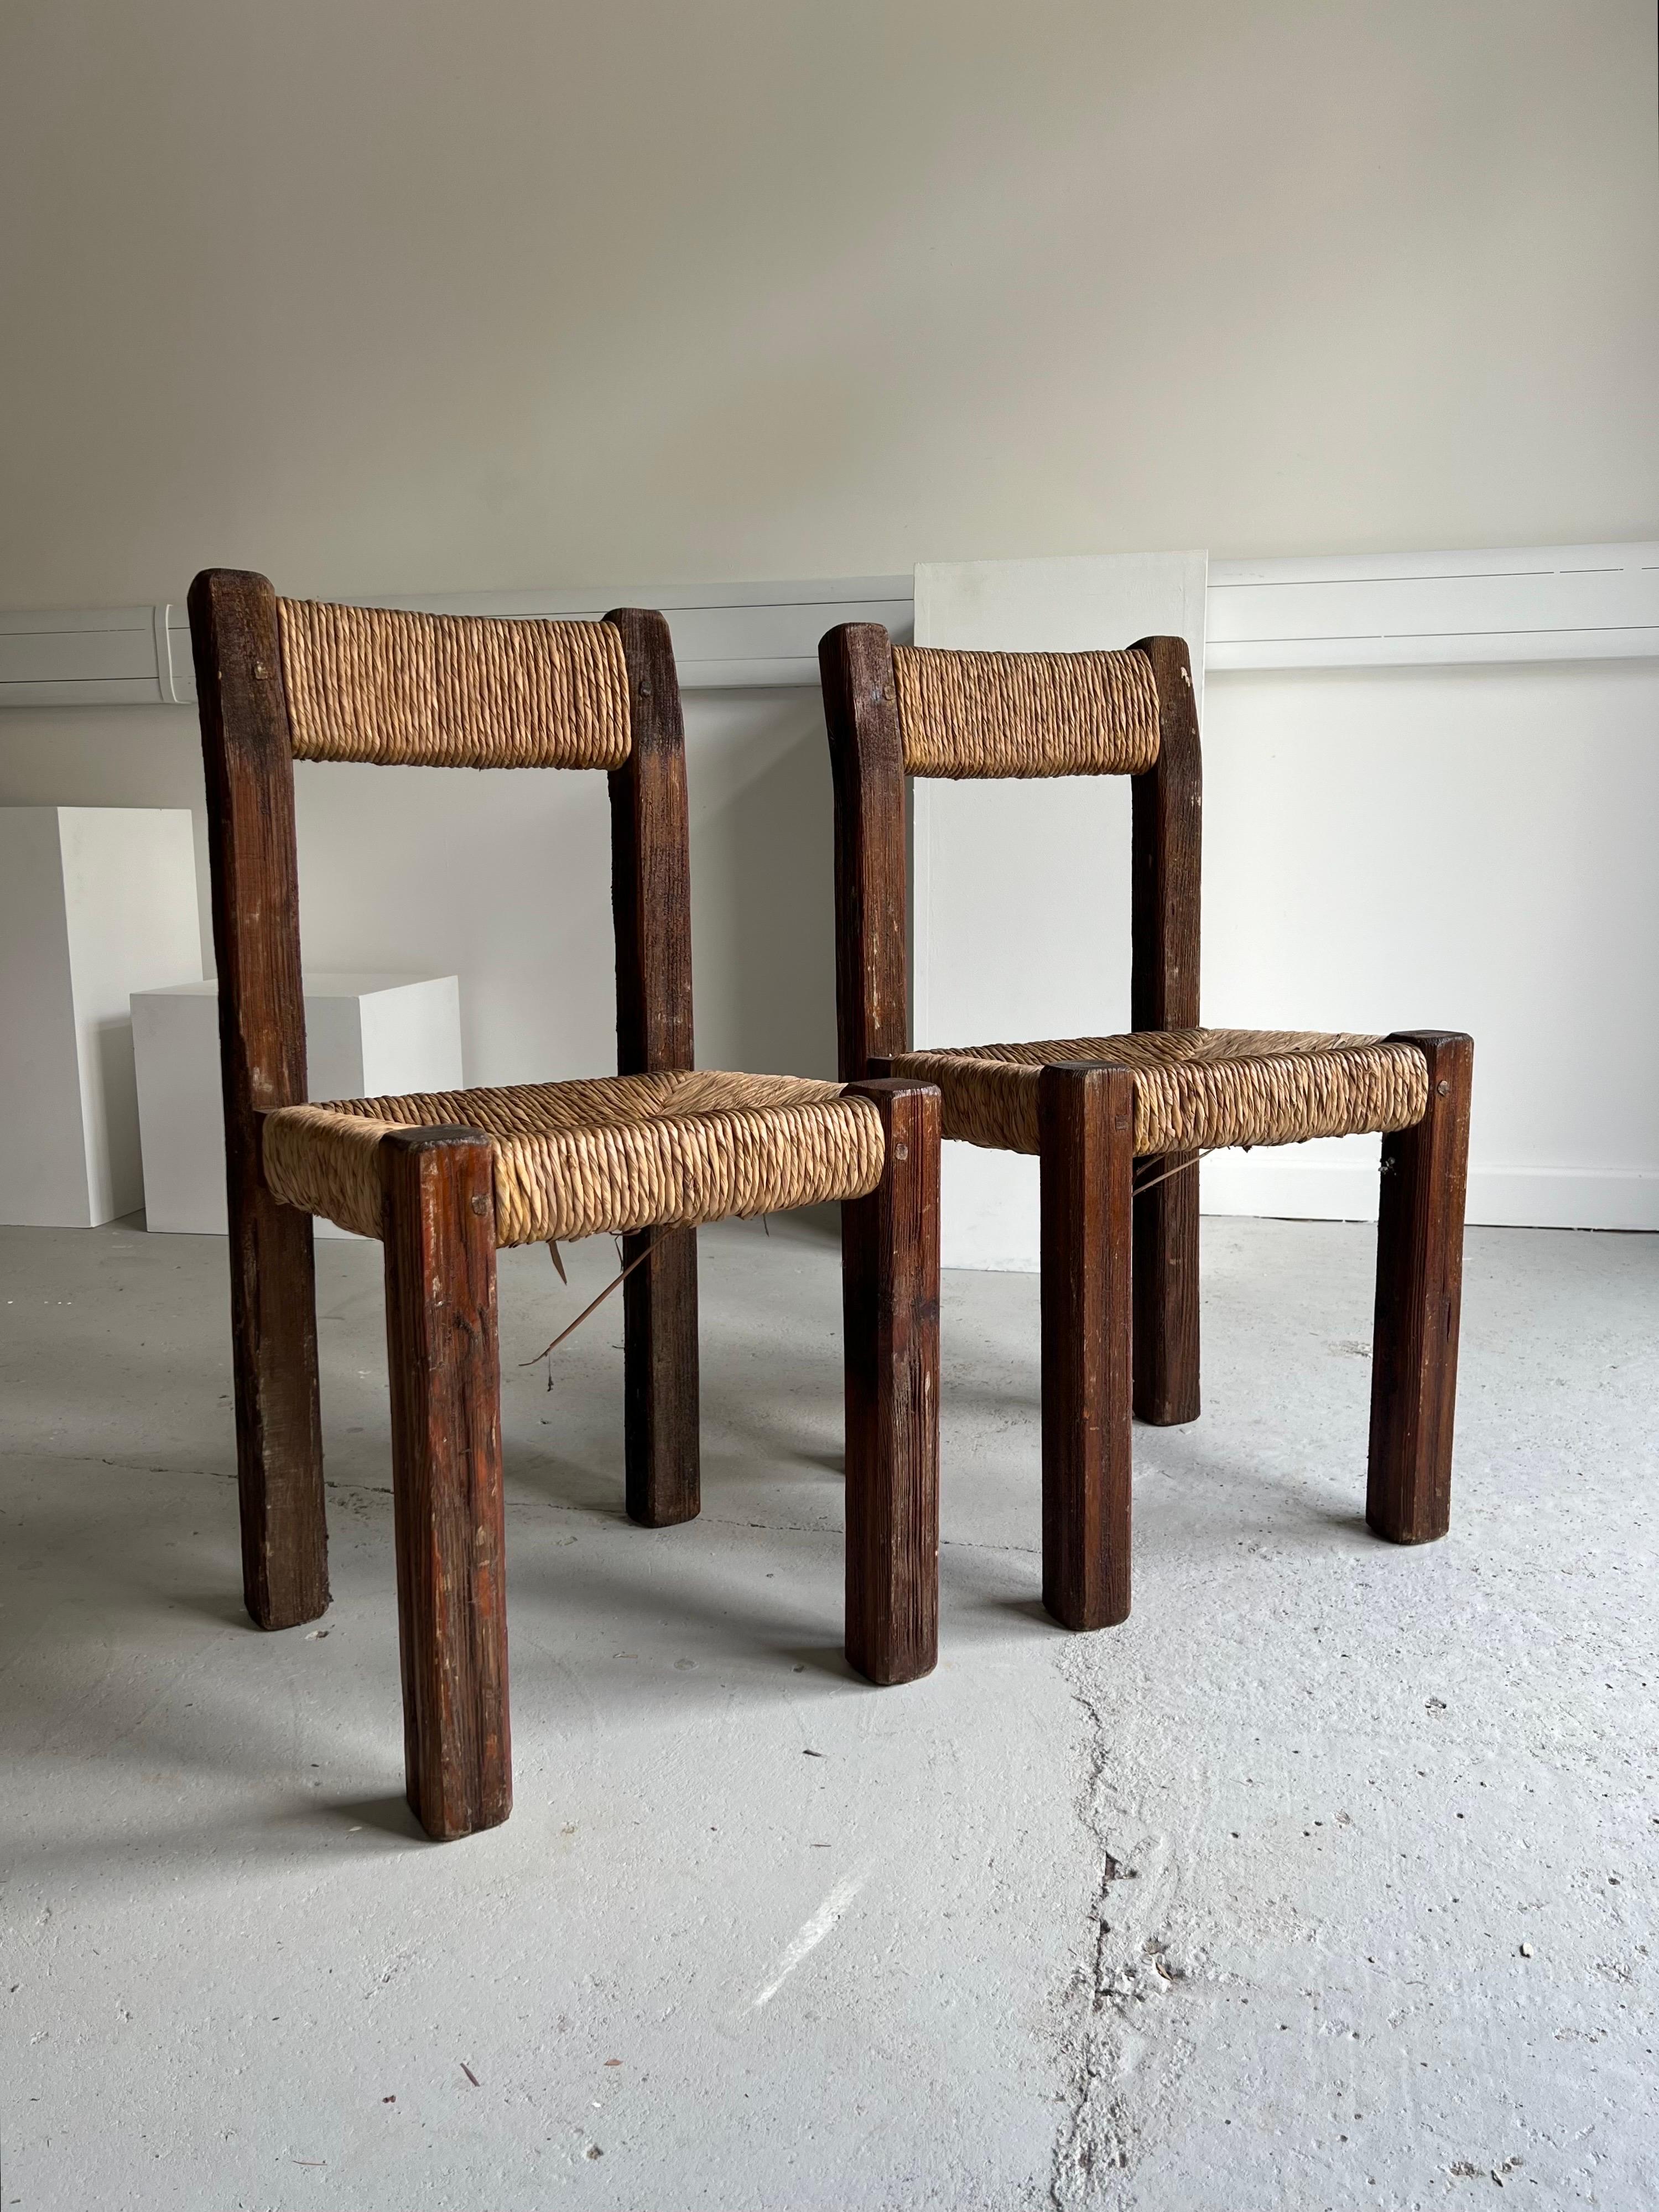 Pair of Brutalist Chairs in Wood and Straw, France Auvergne, 1950s For Sale 1